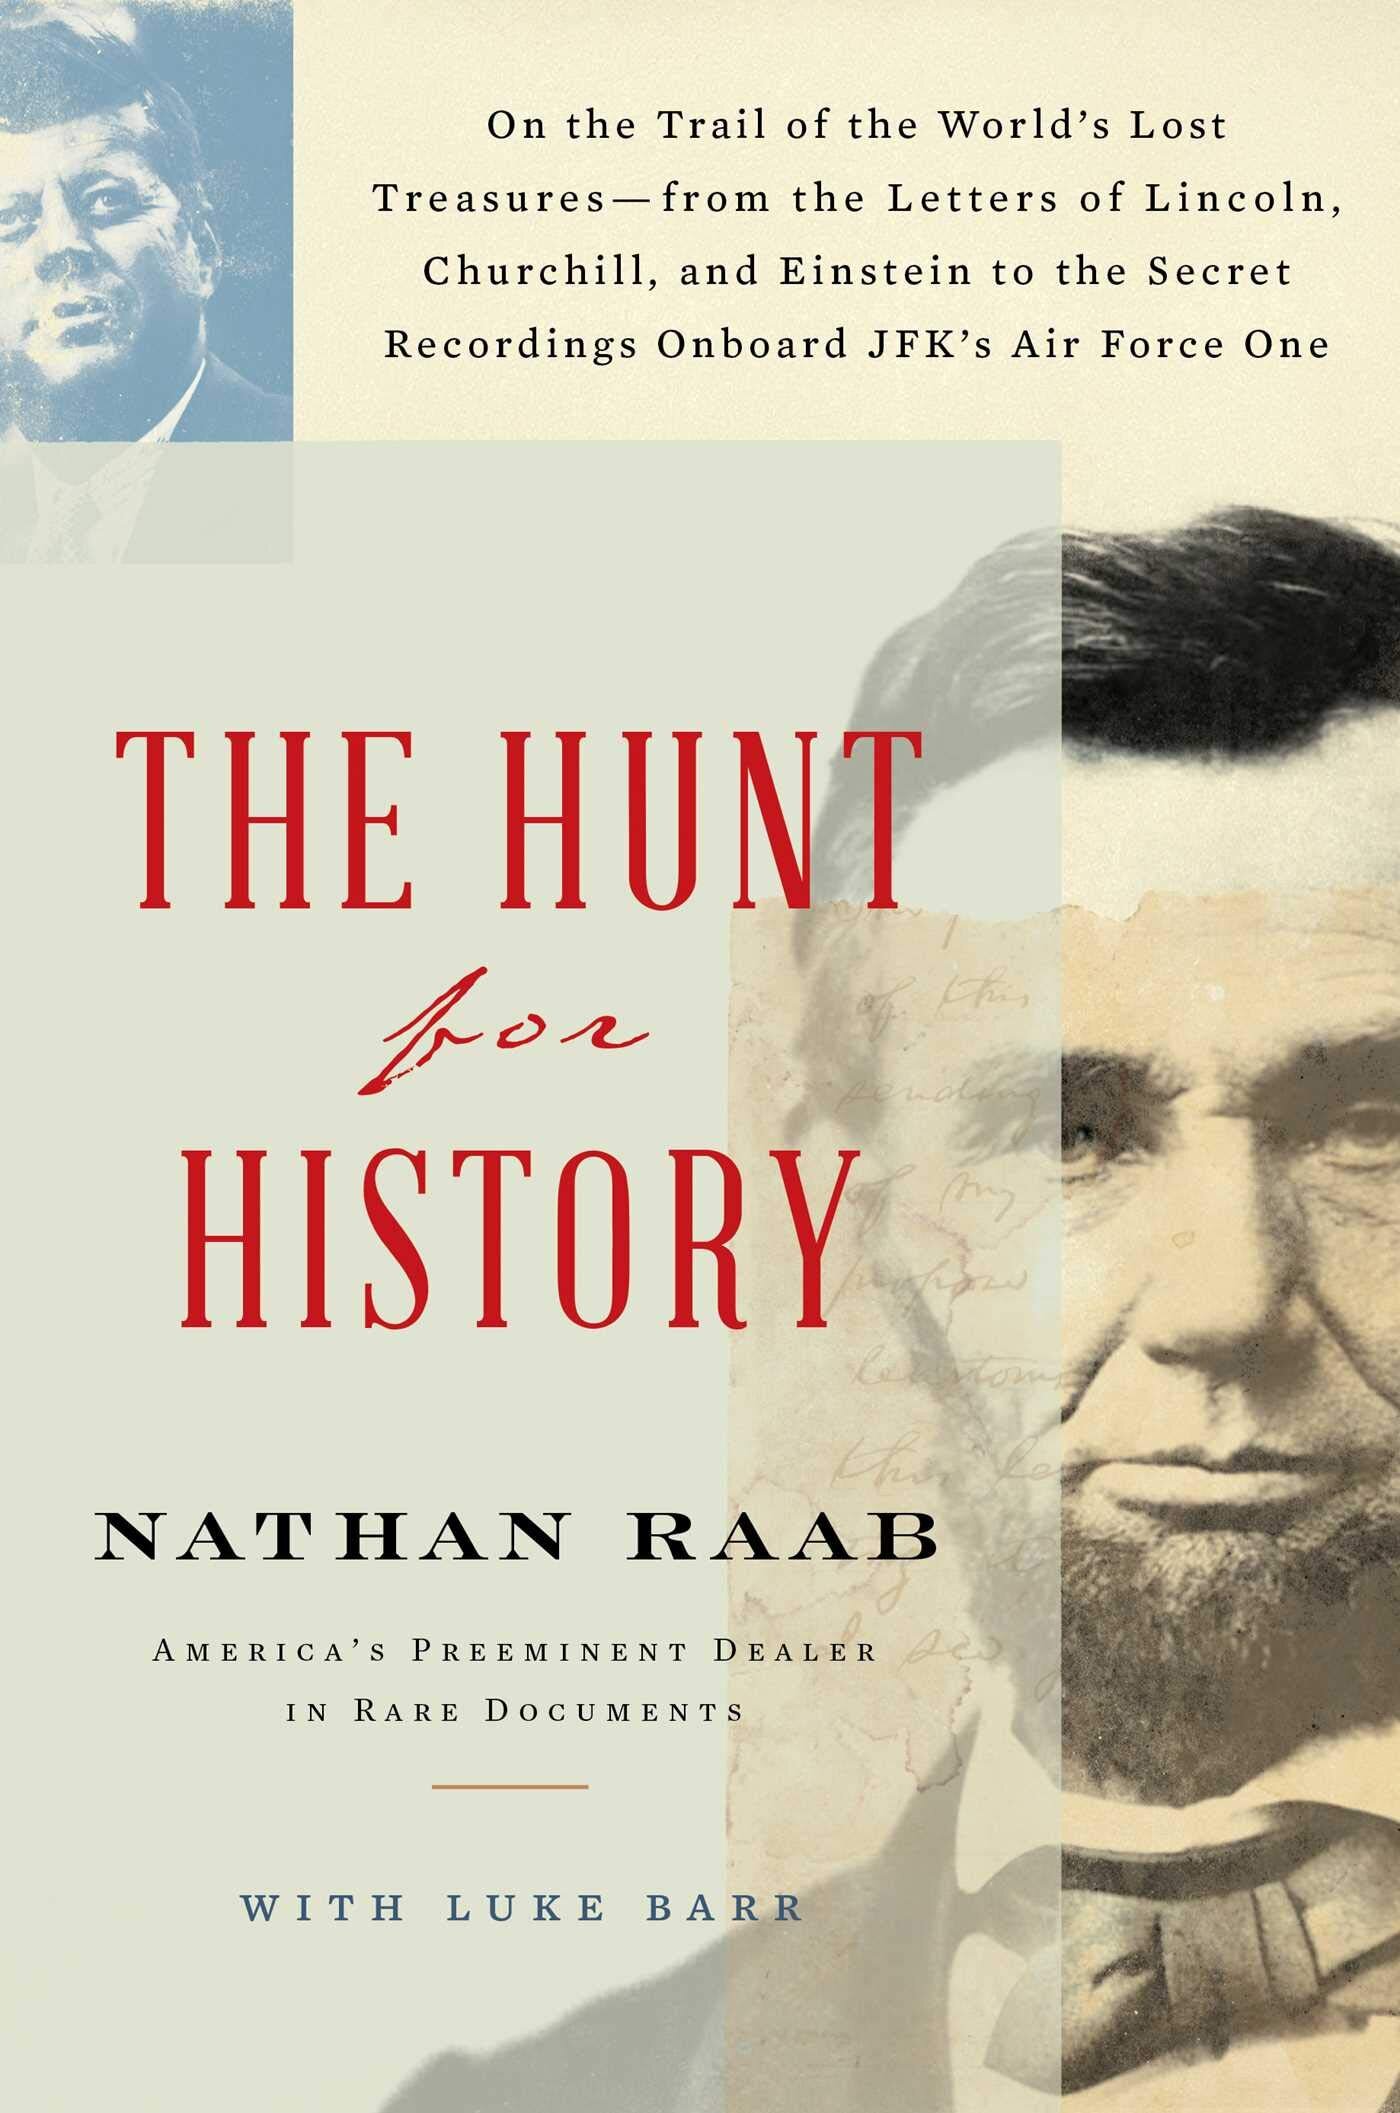 The Hunt for History by Nathan Raab March 2020 Simon and Schuster.jpg